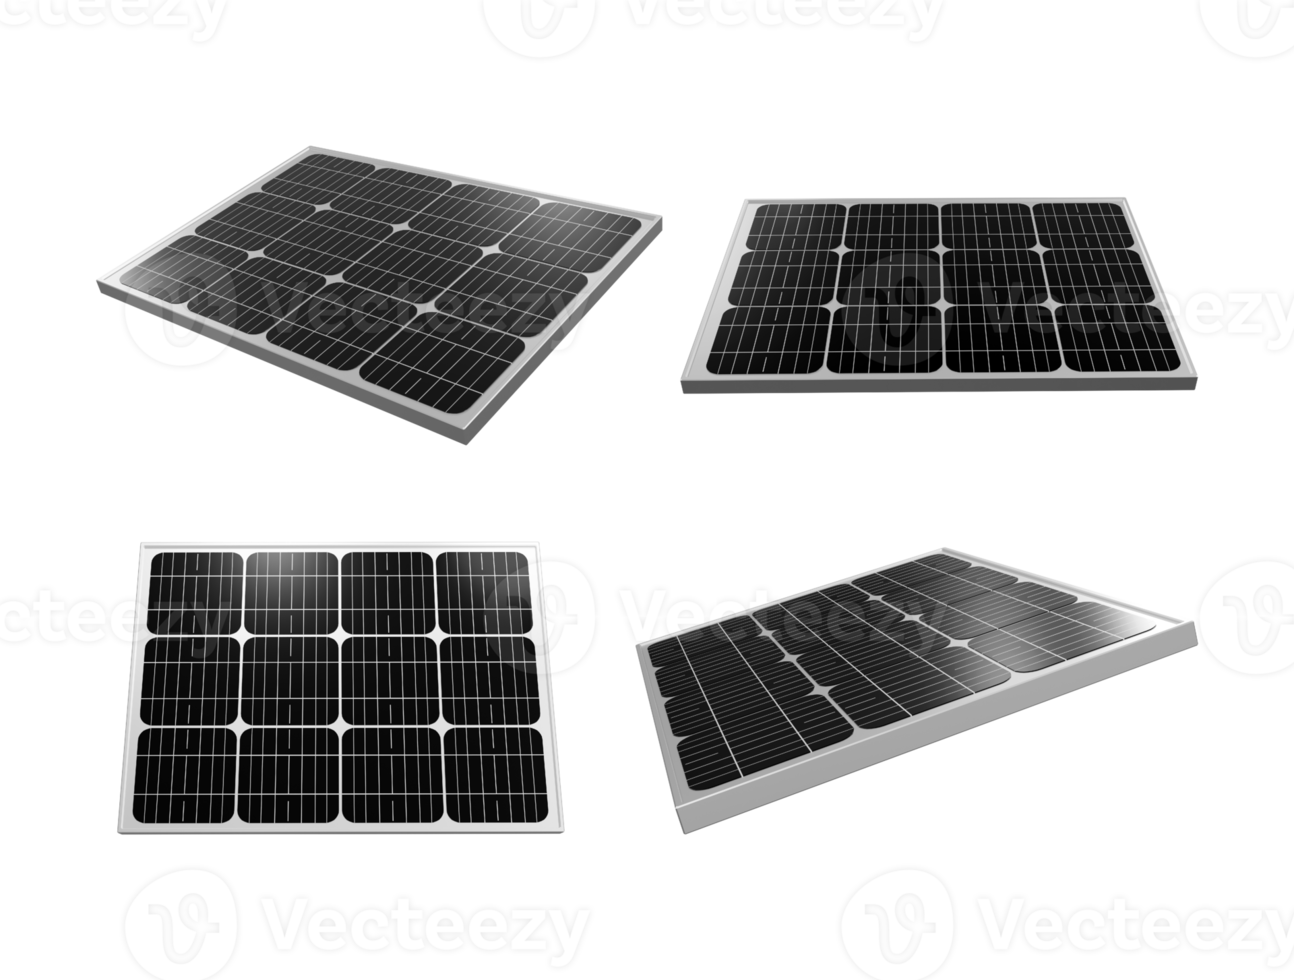 3d rendering of small shiny solar panels from various perspectives png